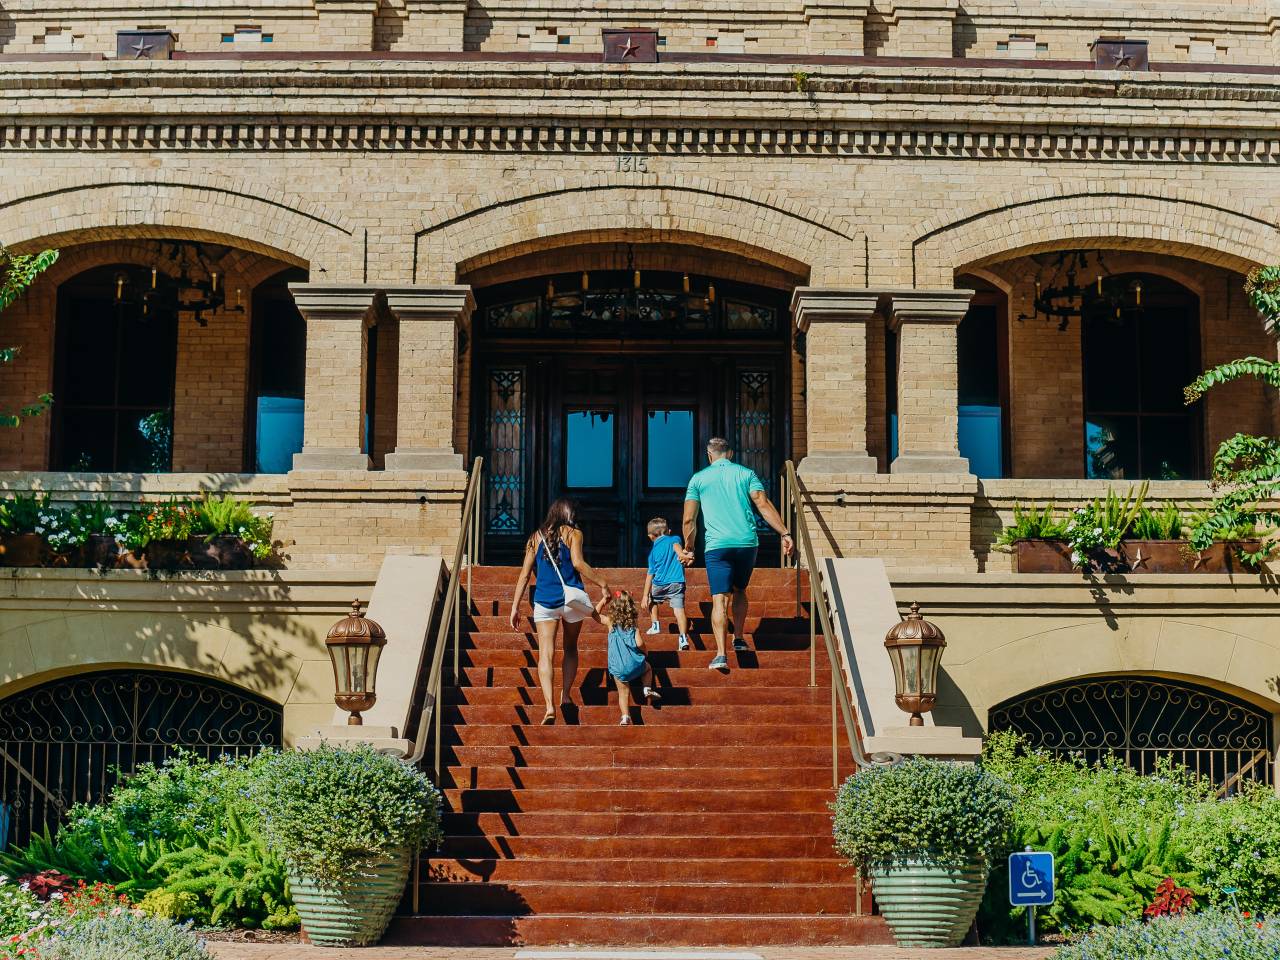 A family ascends the stairs of the Bryan Museum in Galveston, TX.